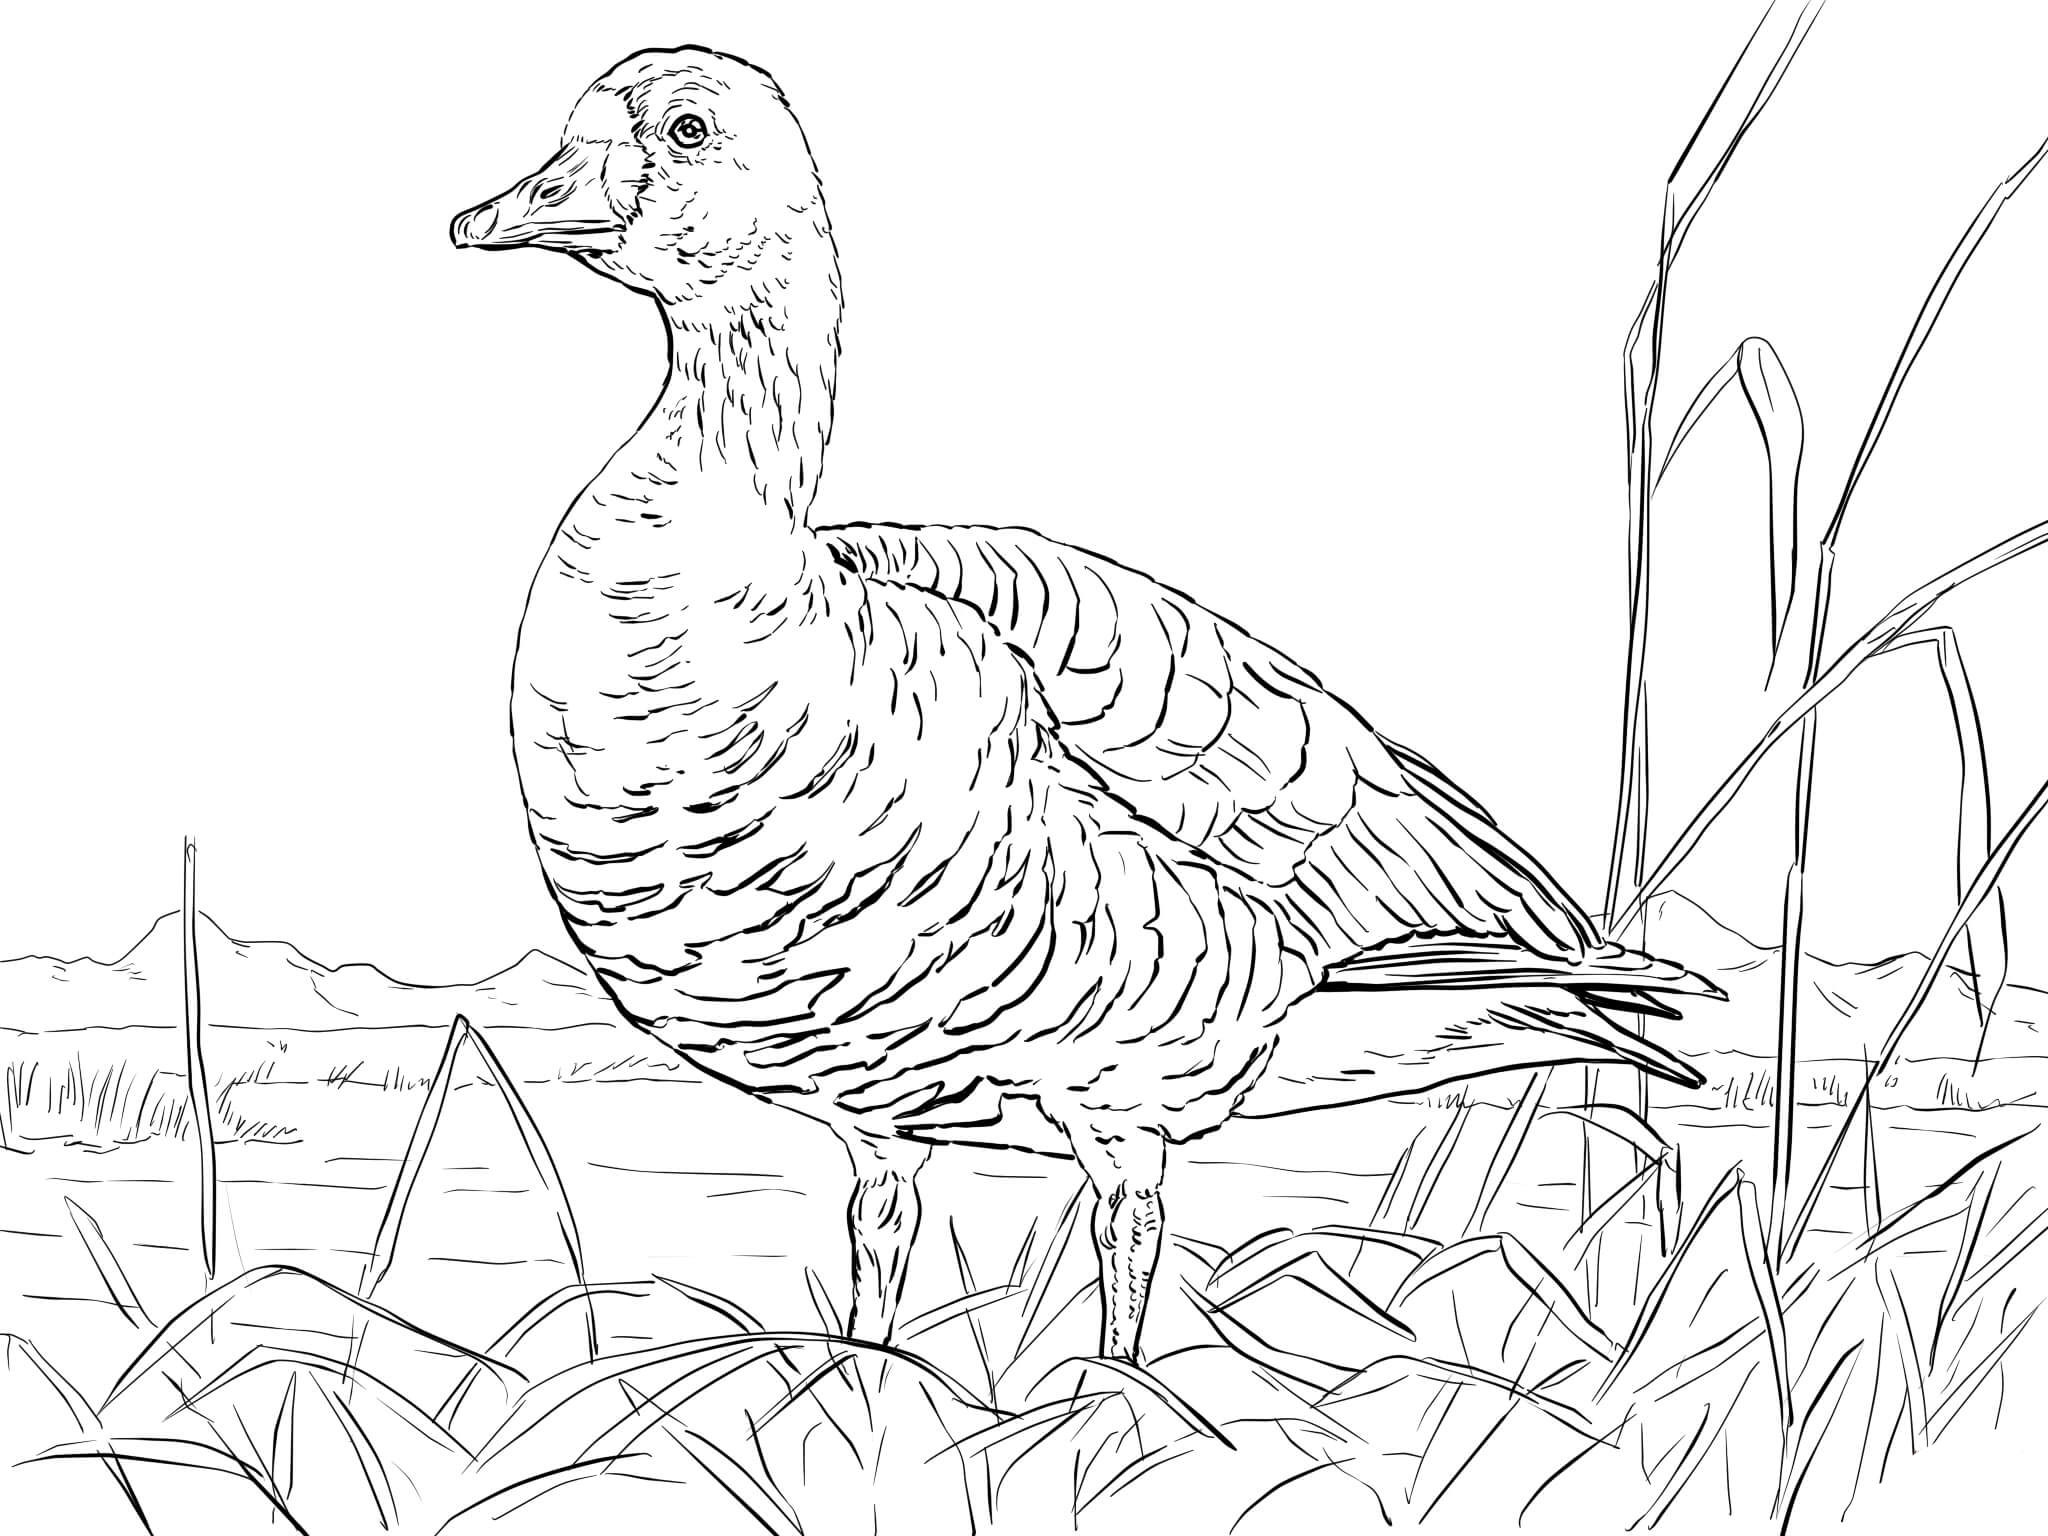 Goose coloring pages to download and print for free